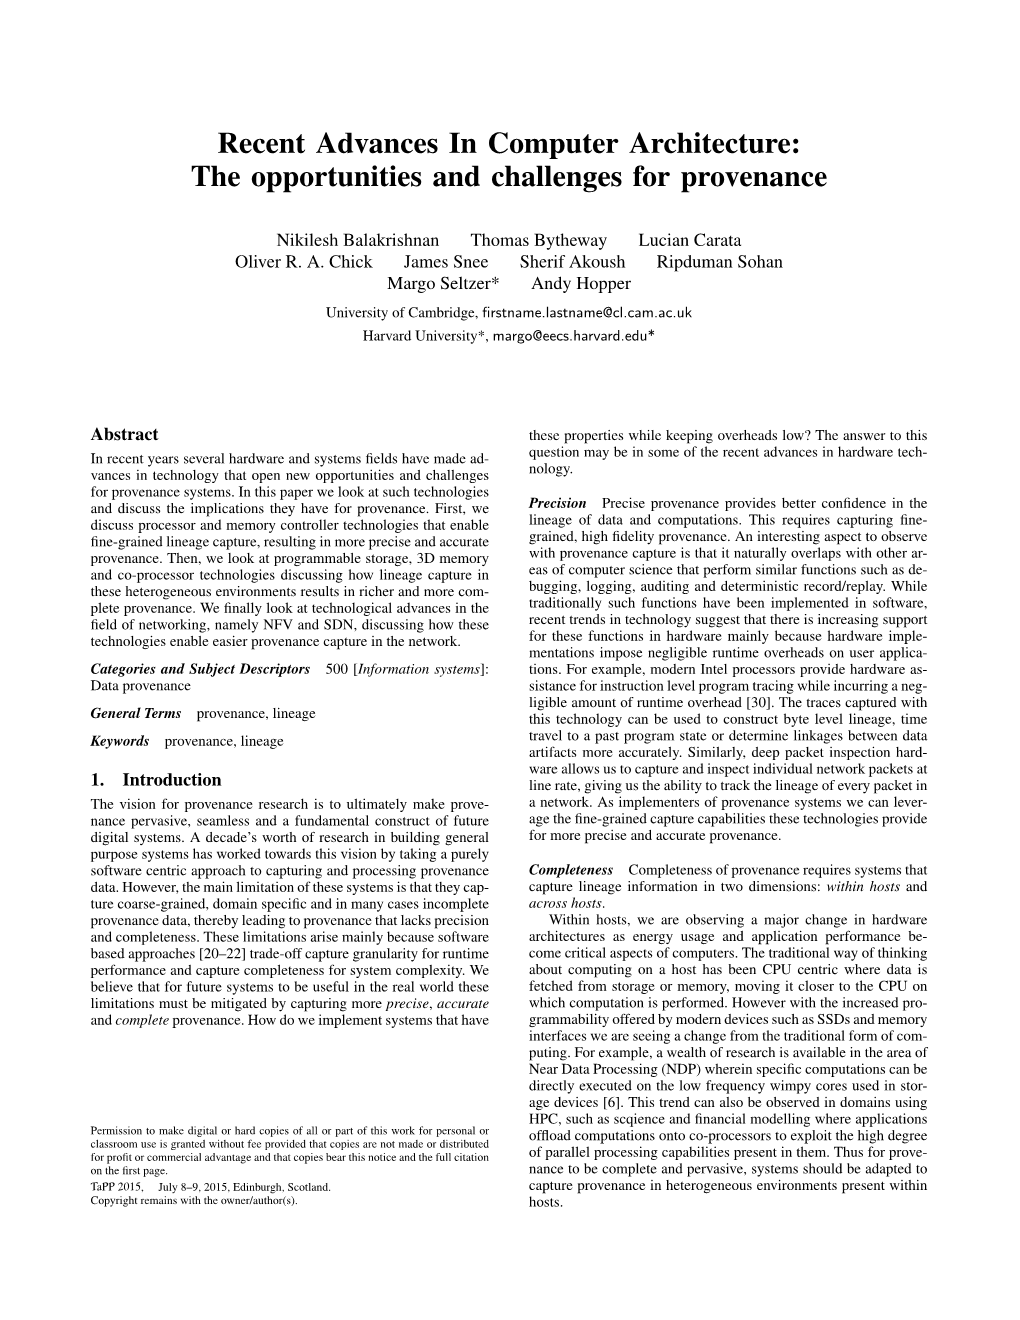 Recent Advances in Computer Architecture: the Opportunities and Challenges for Provenance